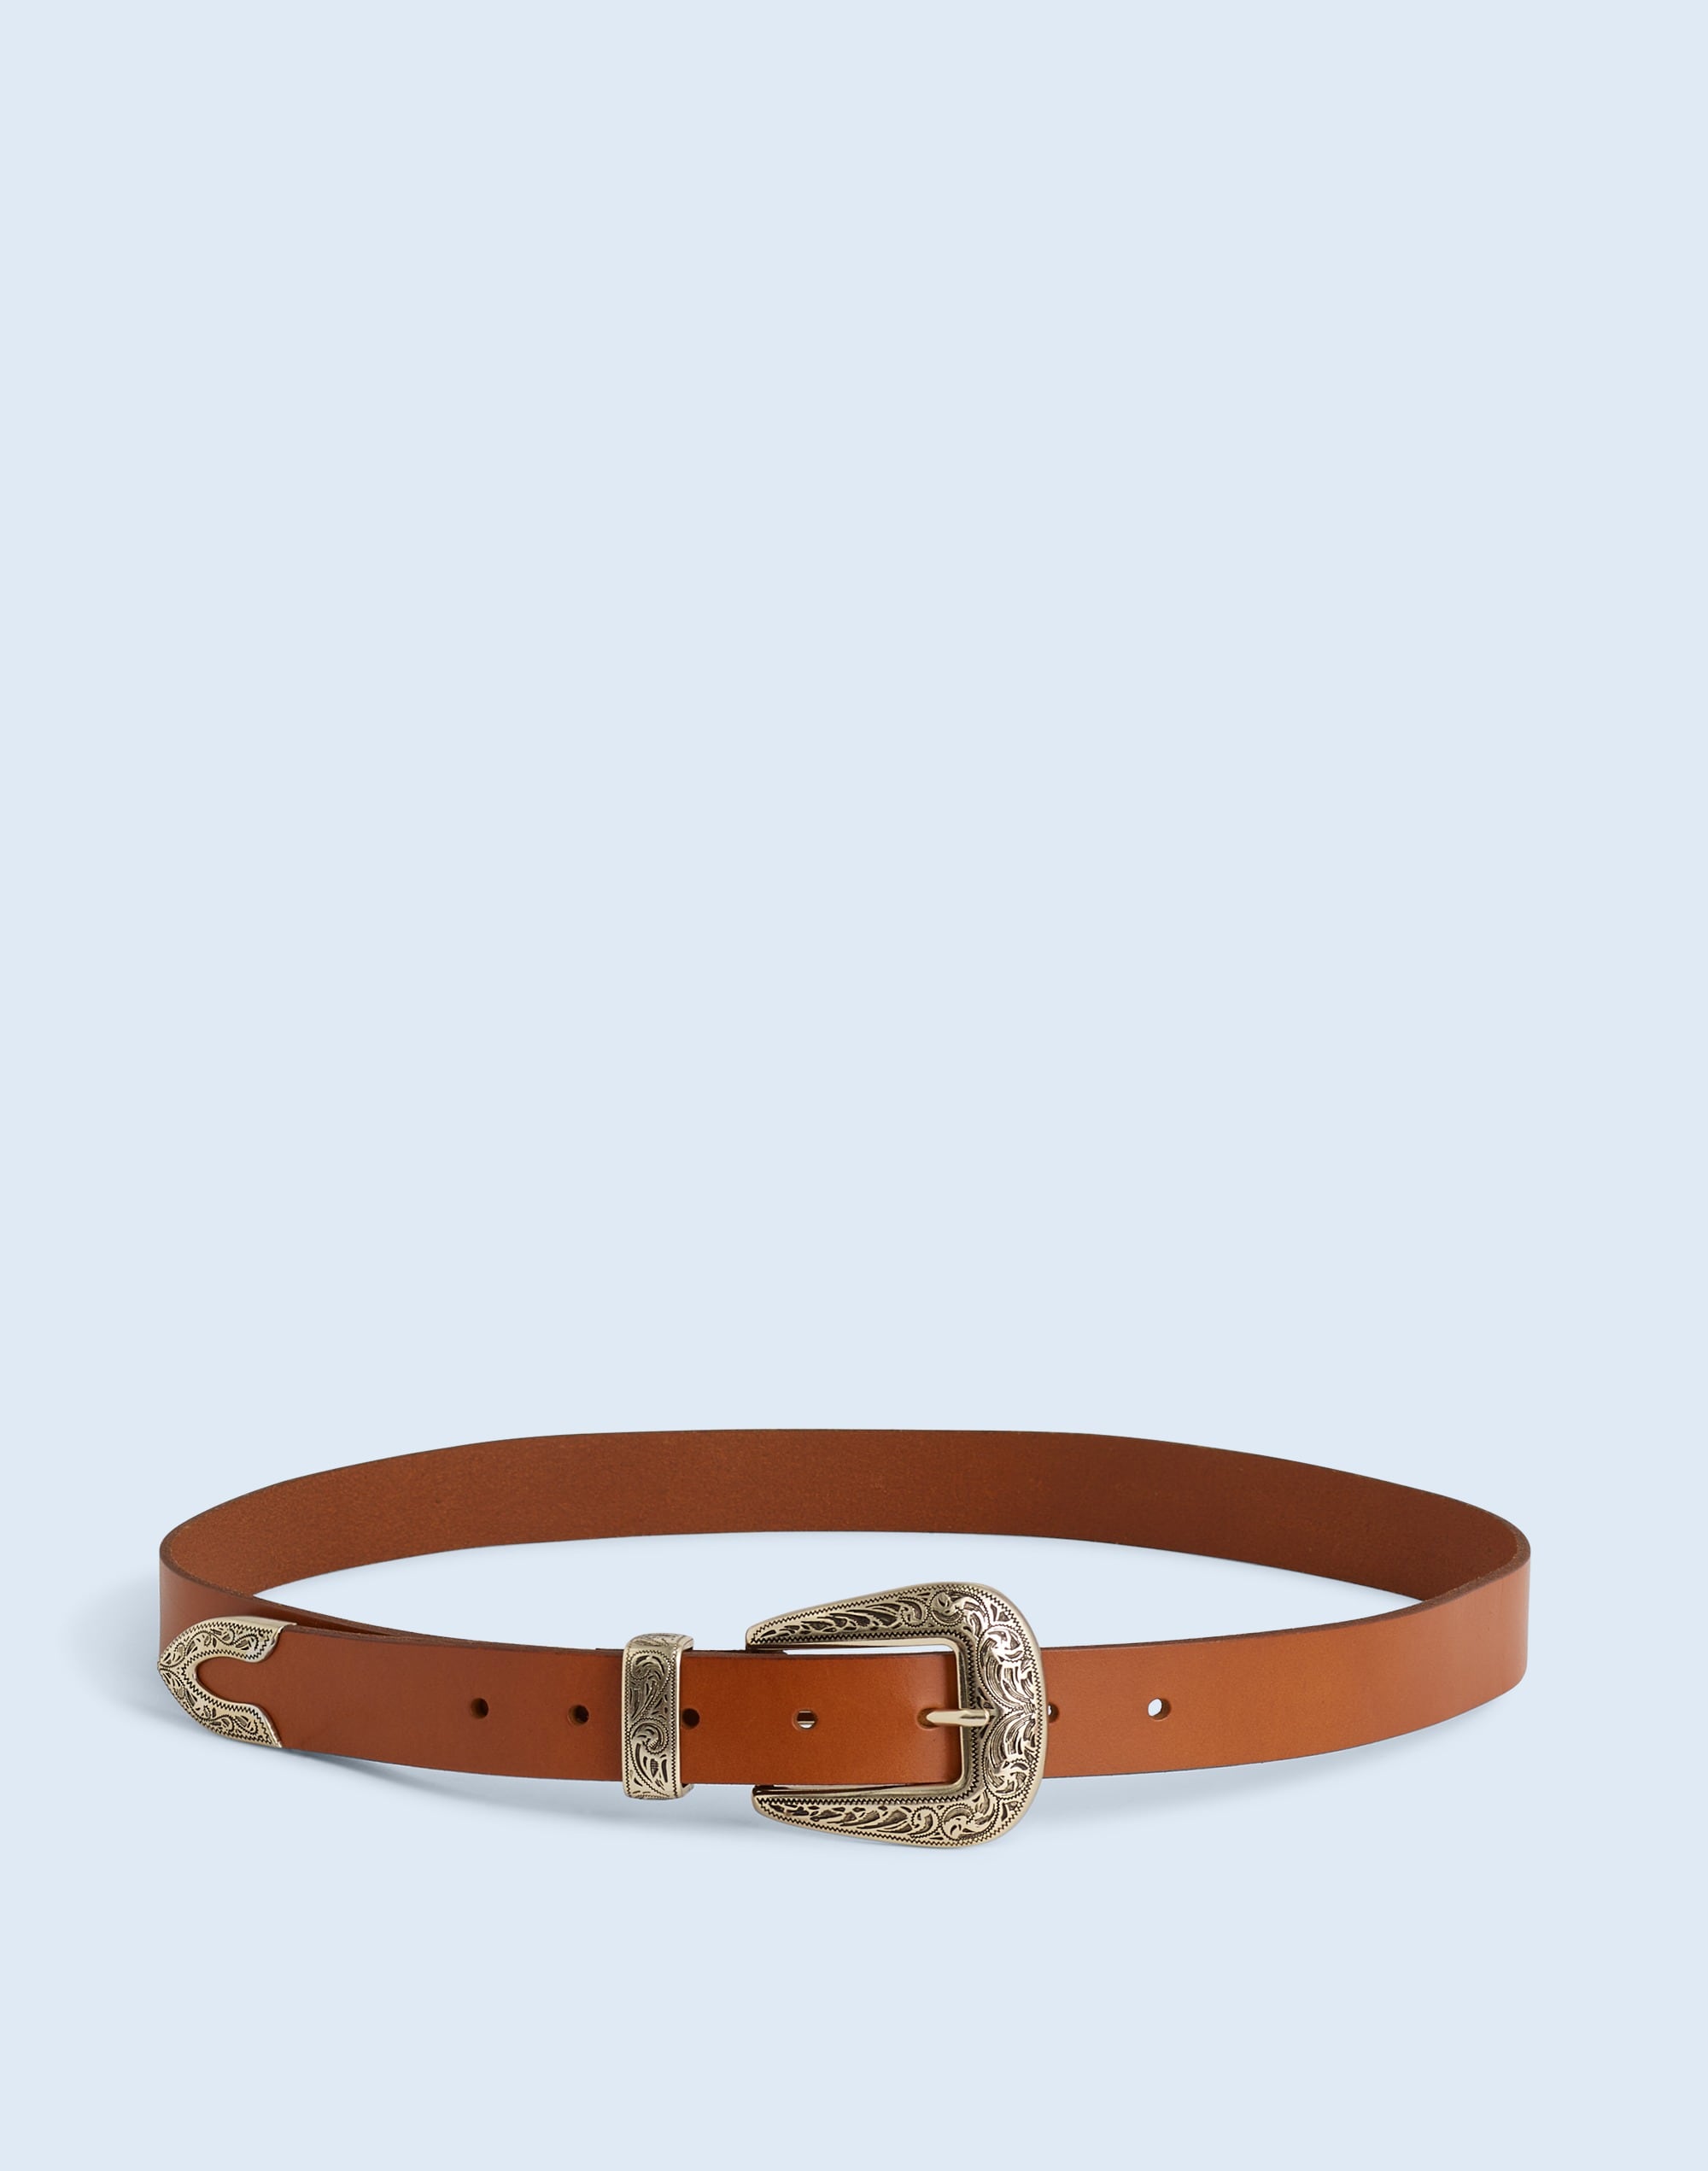 Mw Leather Western Belt In Canyon